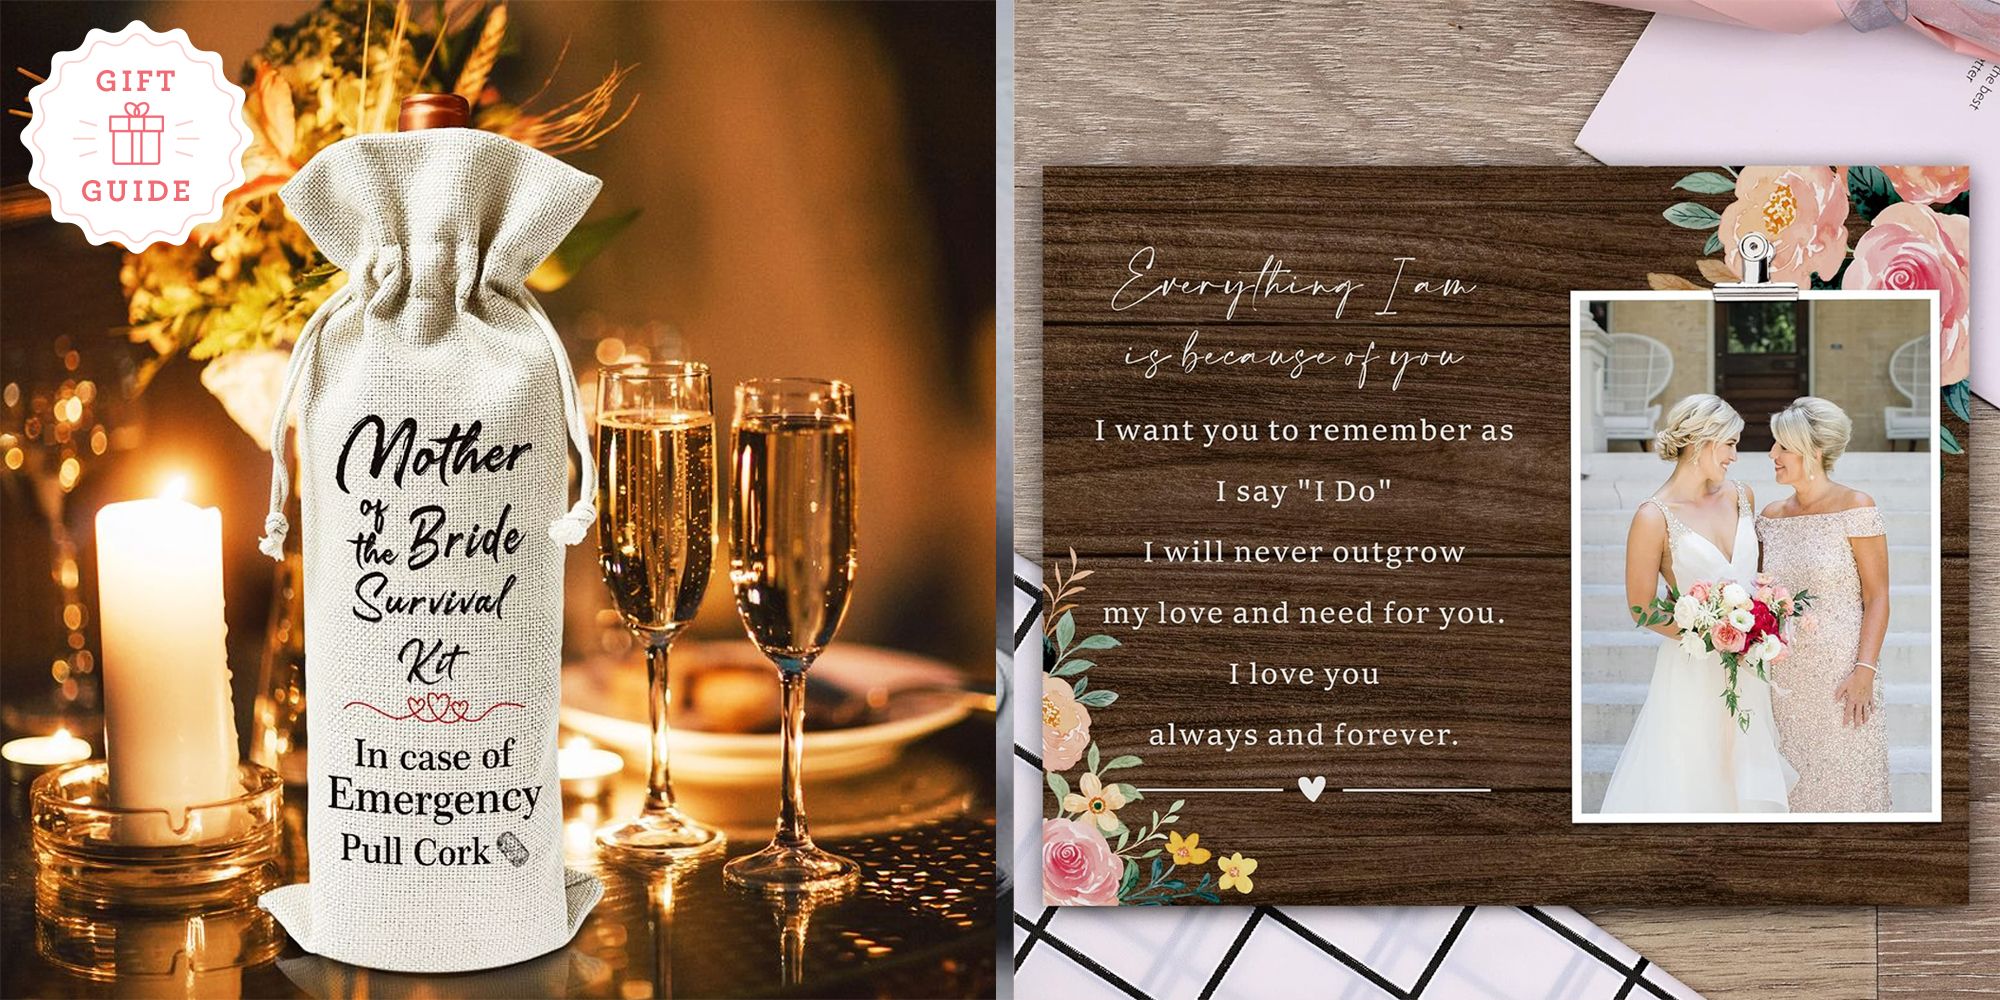 Top 10 Wedding Gifts for Couples: The Ultimate 2023 Guide – The